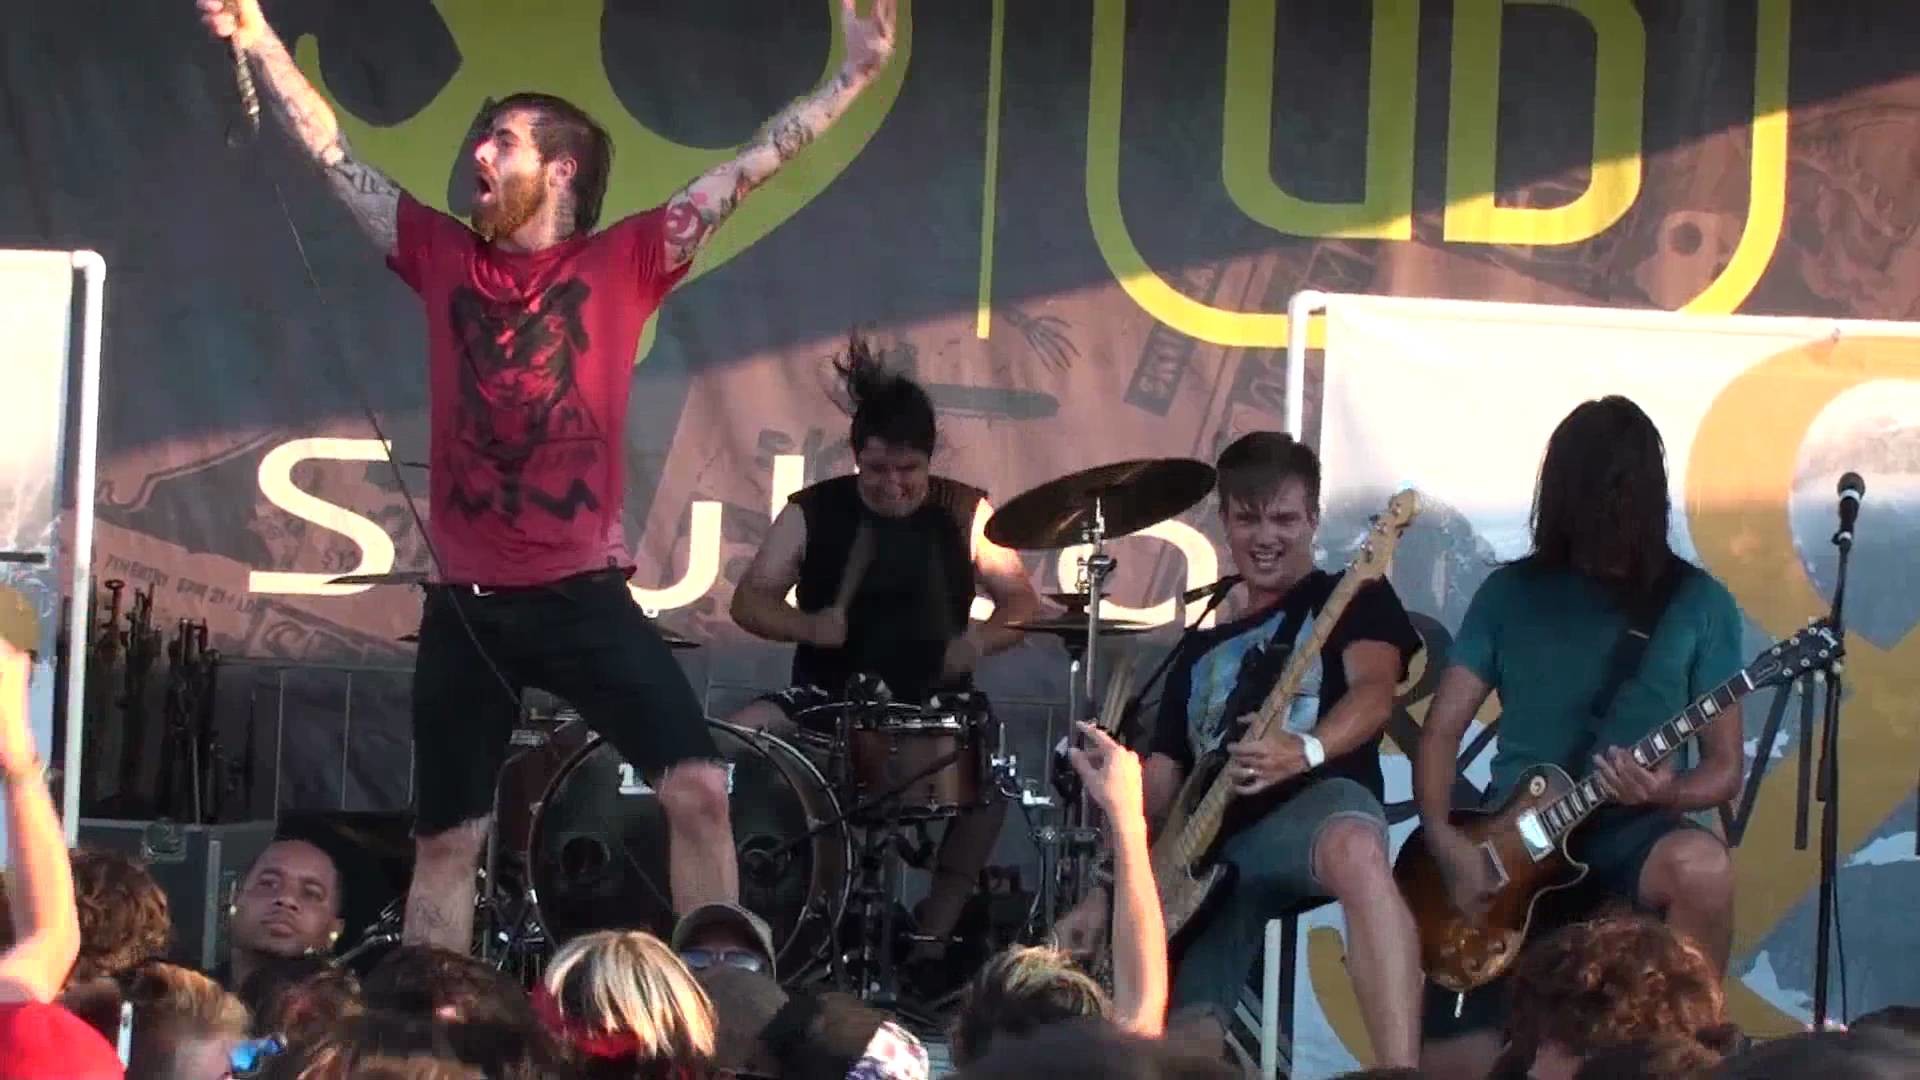 1920x1080 HD Of Mice & Men - Second & Sebring (Live at the Vans Warped Tour) - YouTube